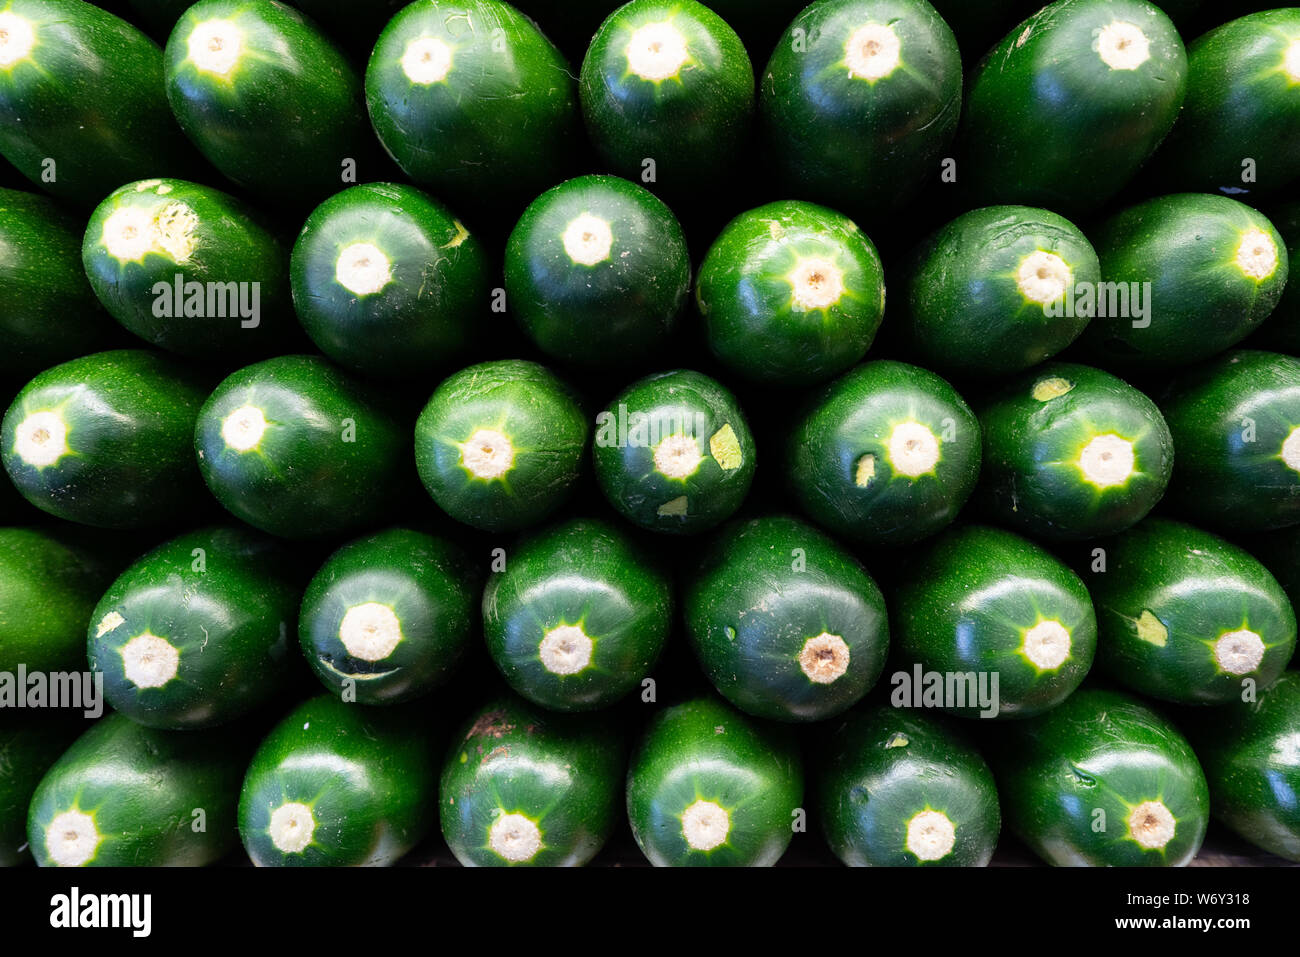 Cucumbers in a stack in produce section of grocery store Stock Photo